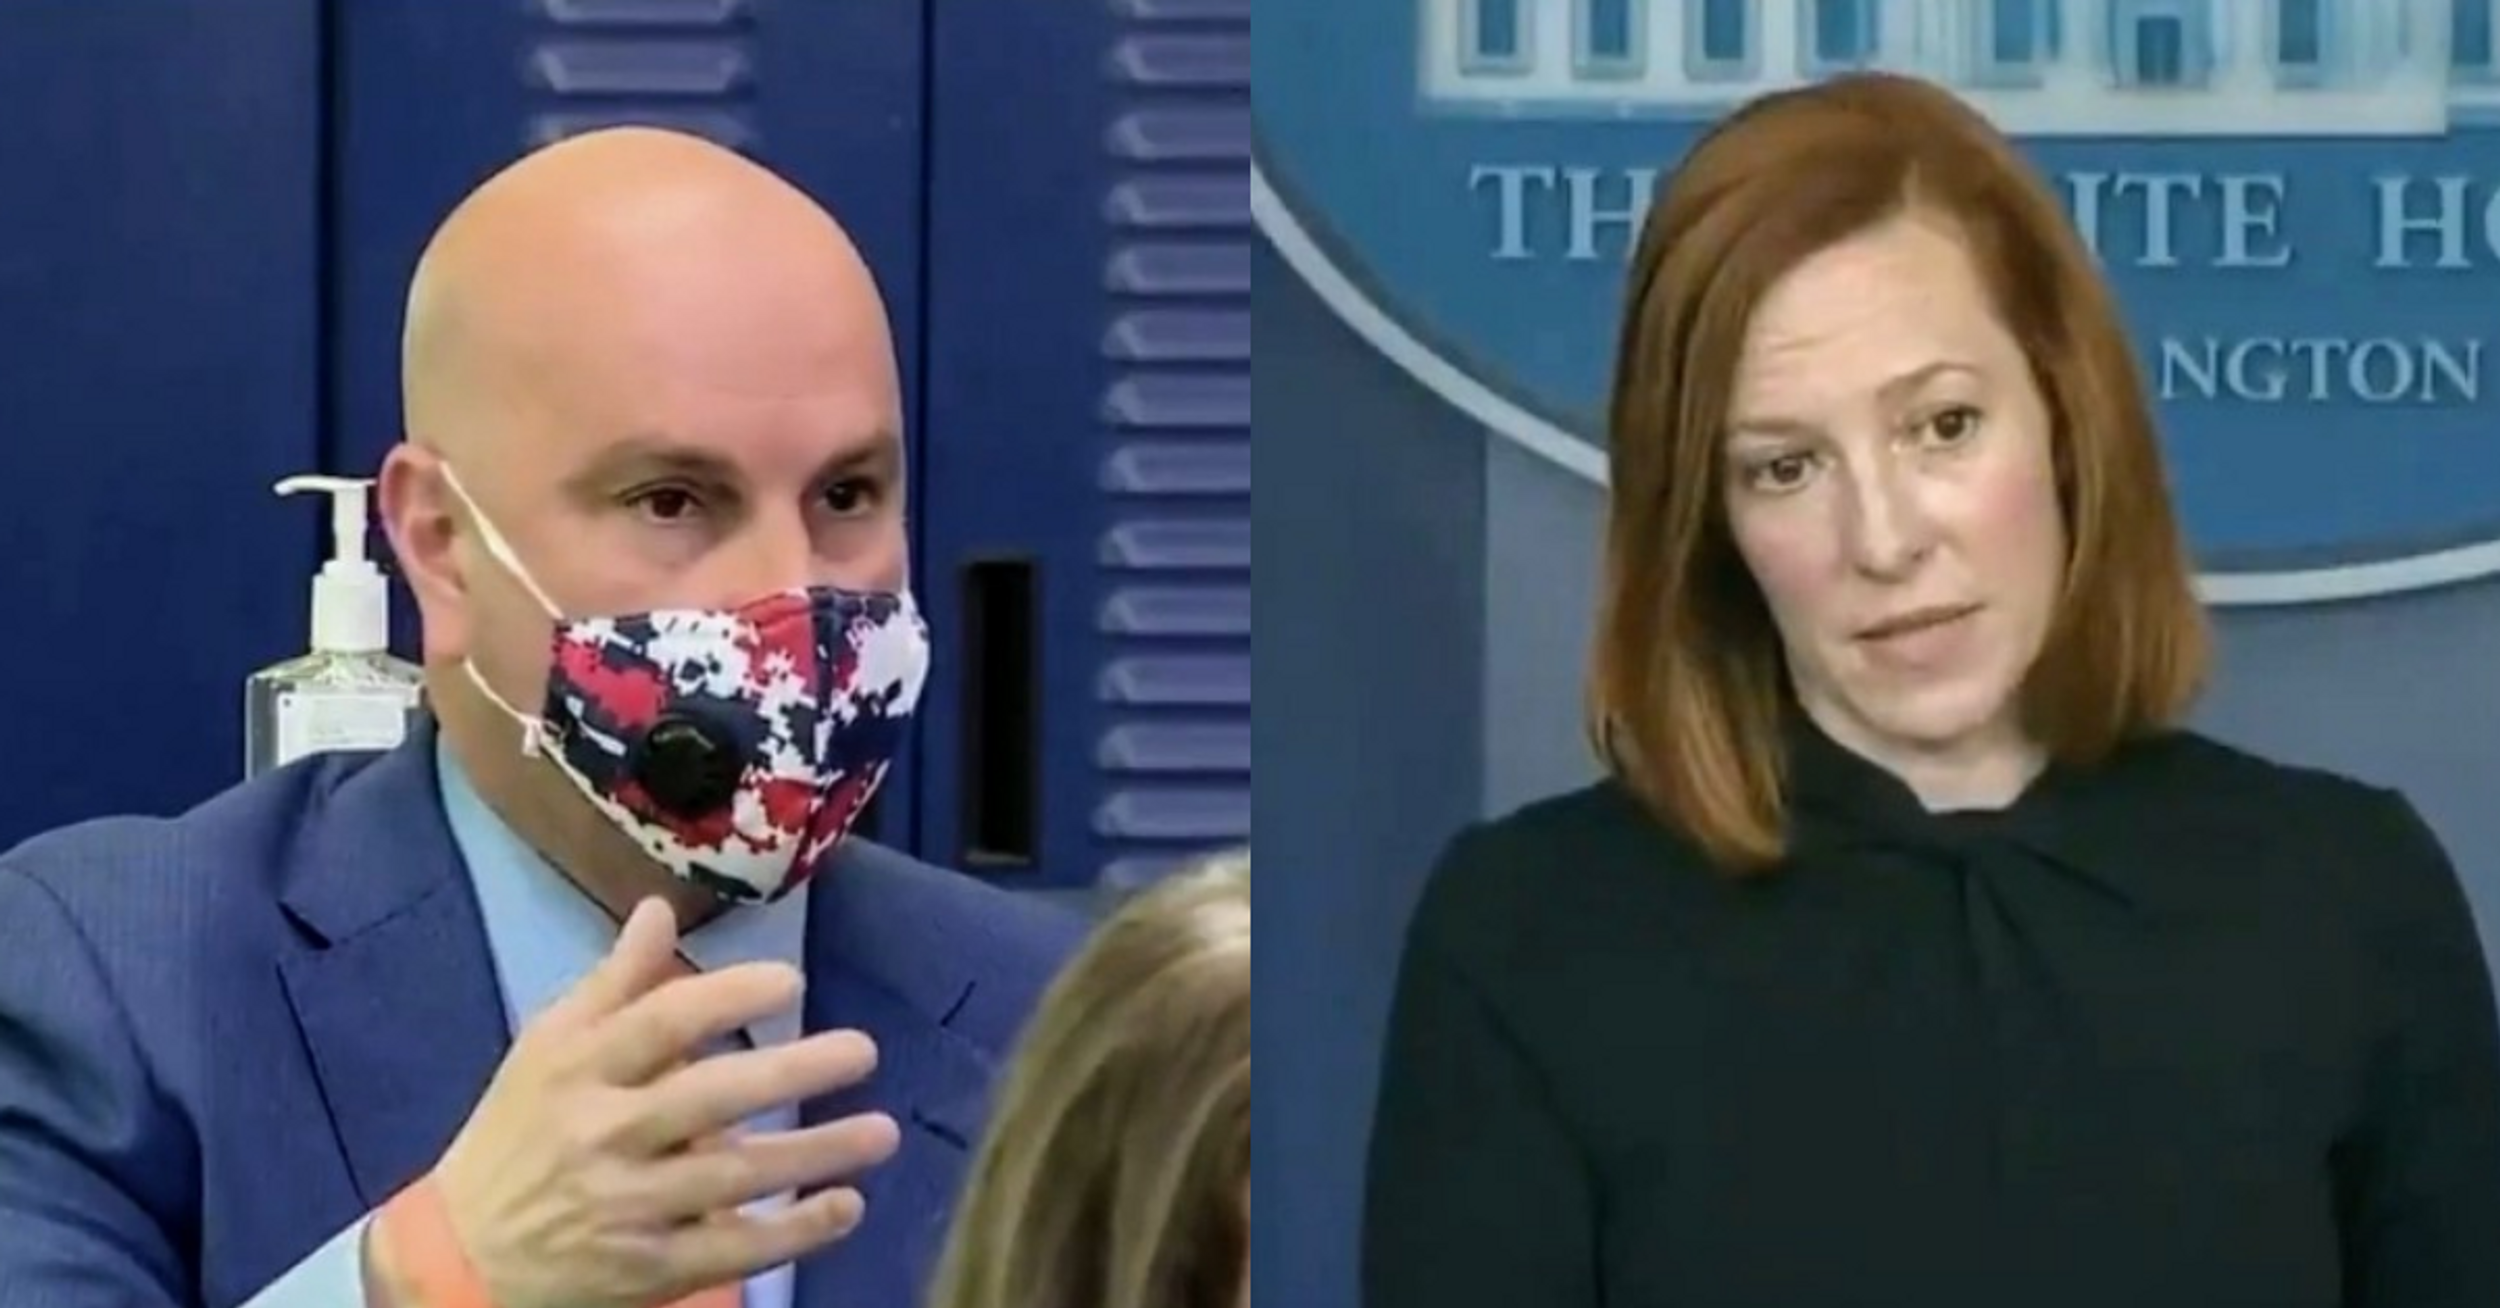 Jen Psaki Perfectly Shuts Down Reporter Who Asked if WH Would Change Its 'Tone' on Voting Rights